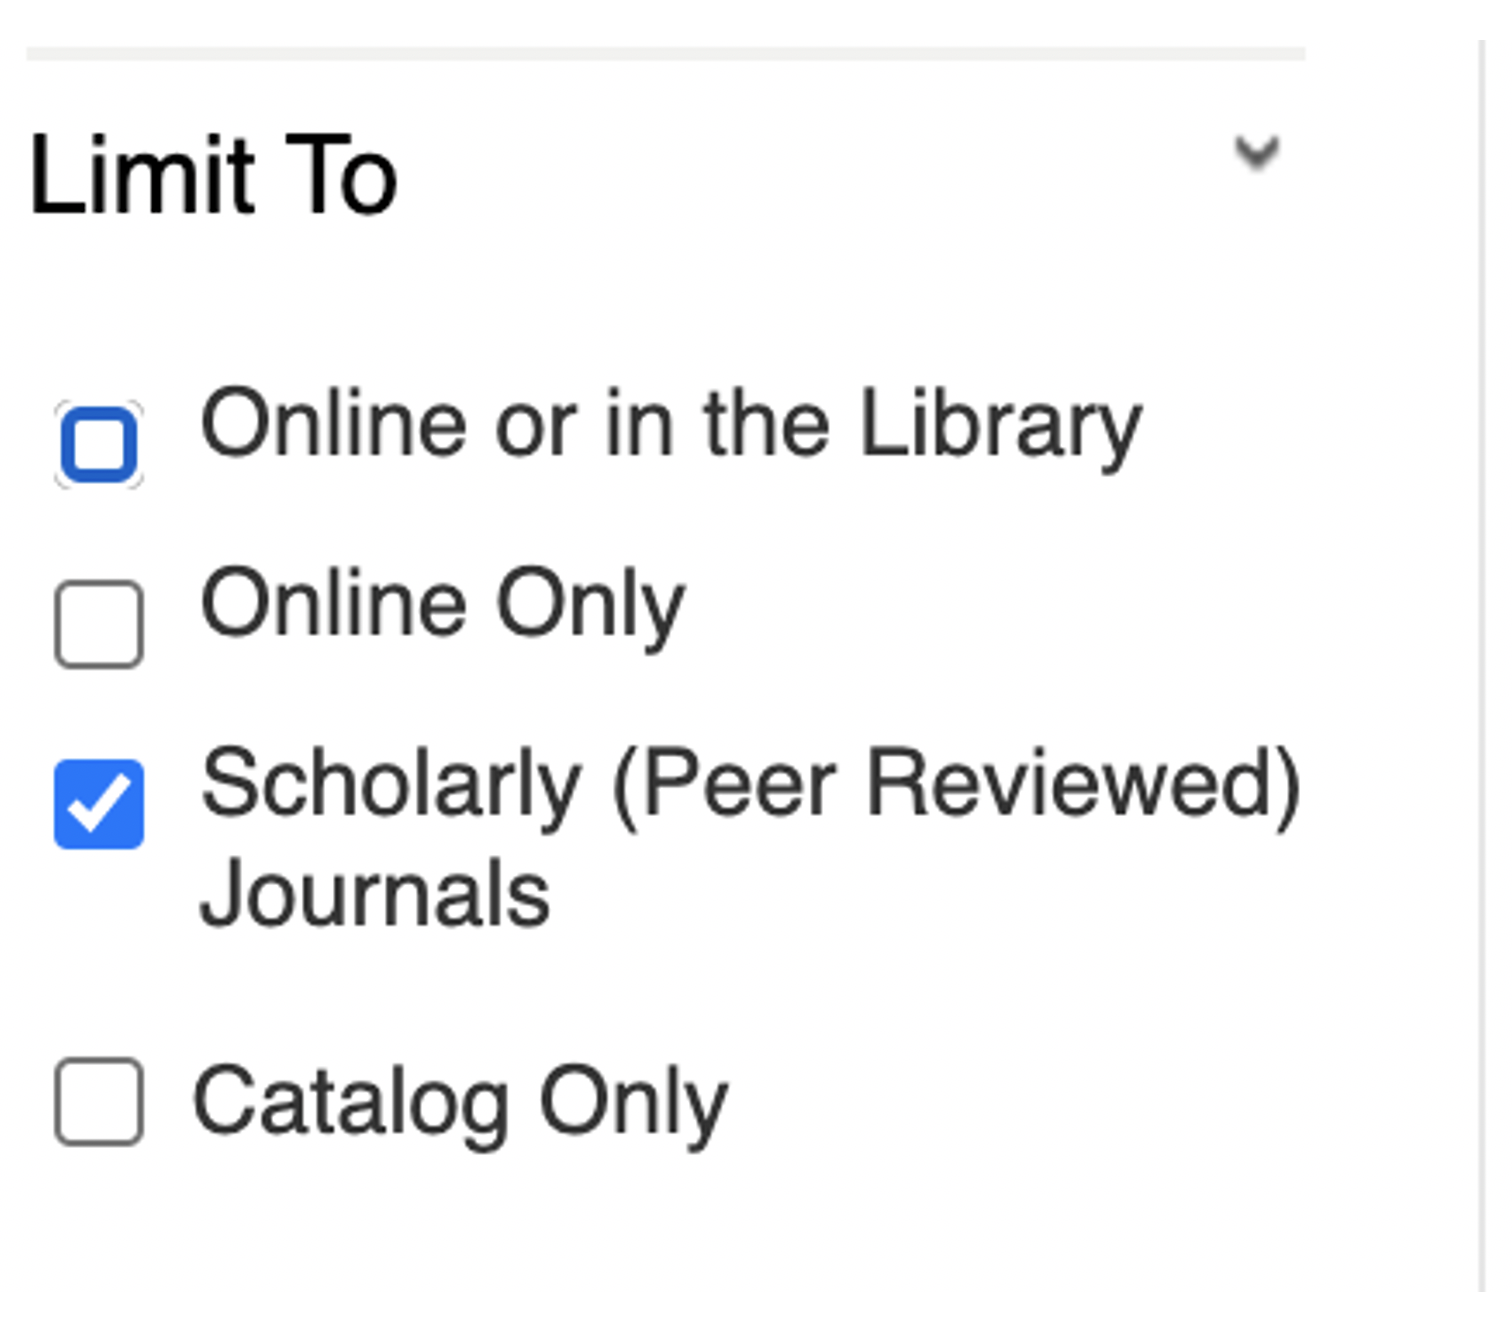 Database "Limit To" box that shows a checkbox for scholarly/peer-reviewed journals.